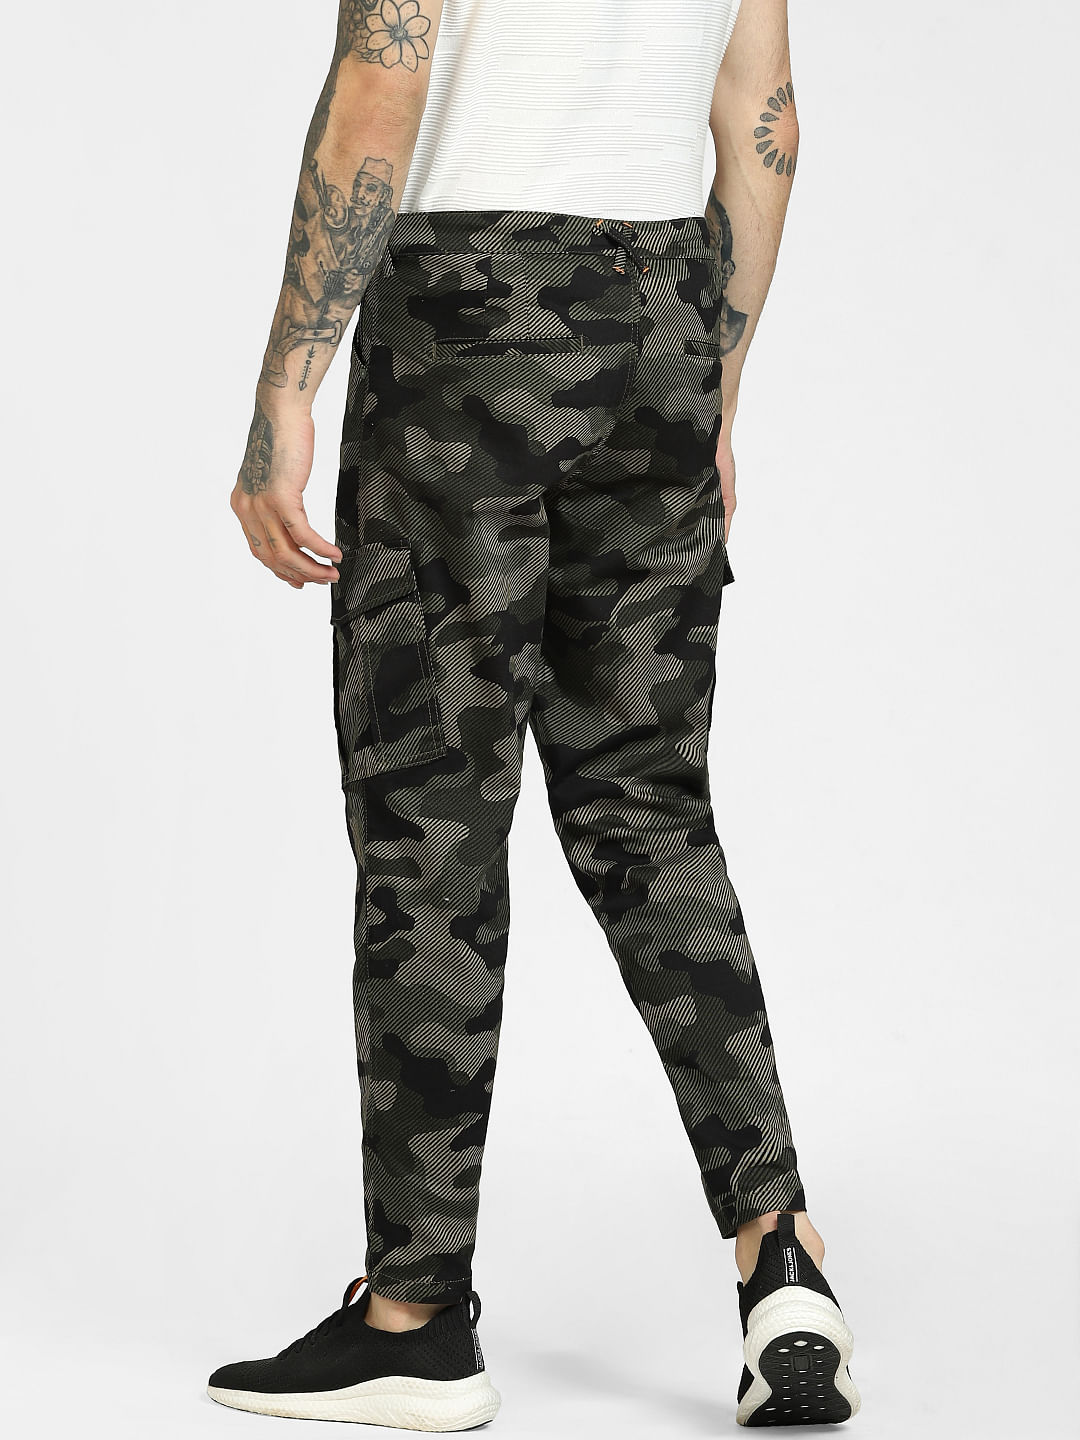 Buy THE DAILY OUTFITS Men Printed Lounge Pants - Lounge Pants for Men  19176010 | Myntra